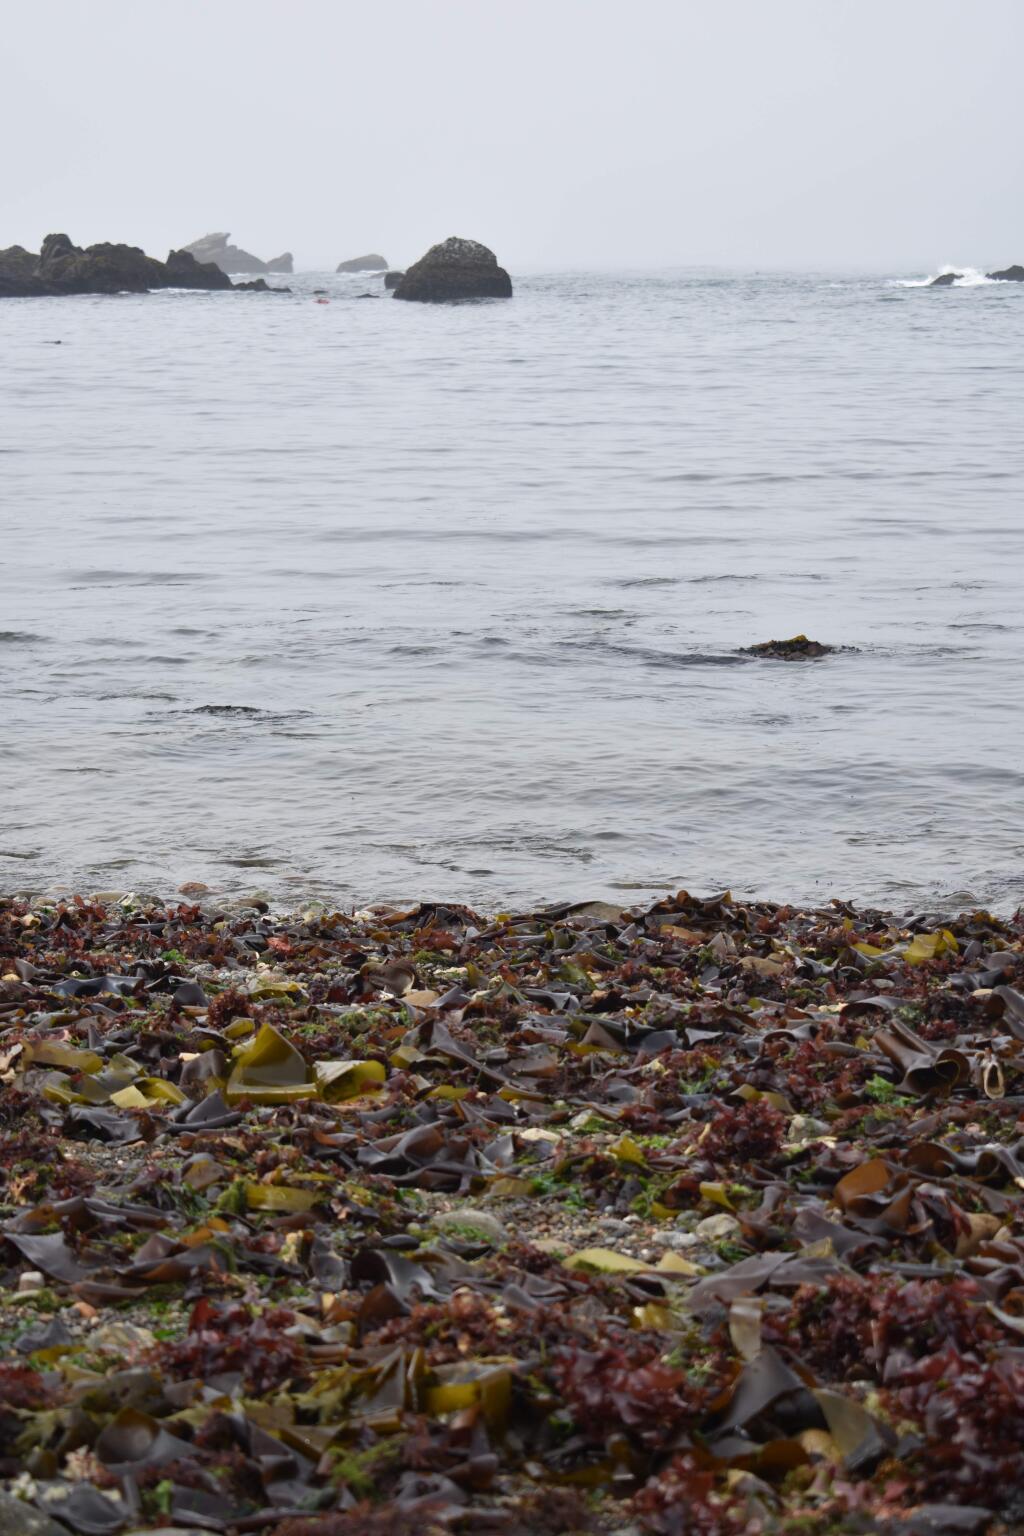 A variety of seaweed on the shore of Stillwater Cove. (Photo by Tracy Salcedo)